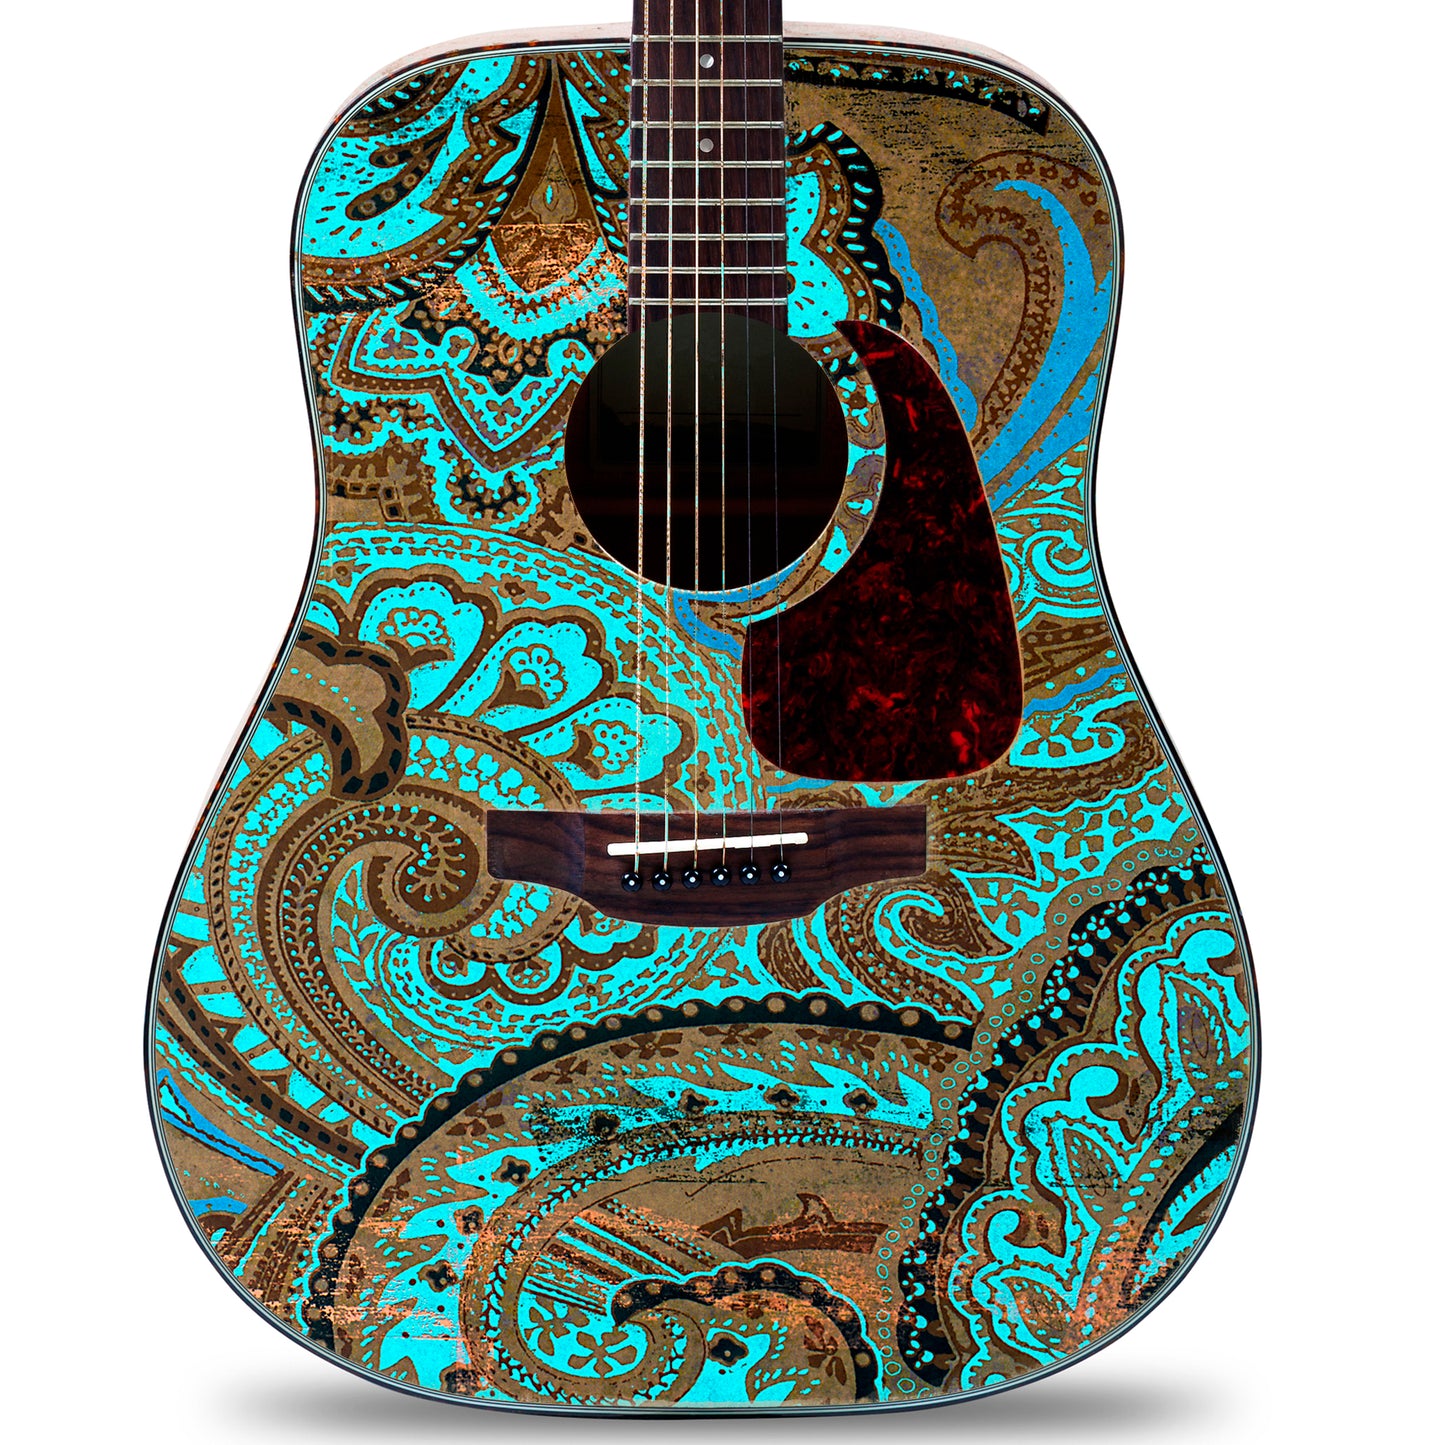 Acoustic/Electric Guitar Skin Wrap Vinyl Decal Sticker Modern Lace GS169